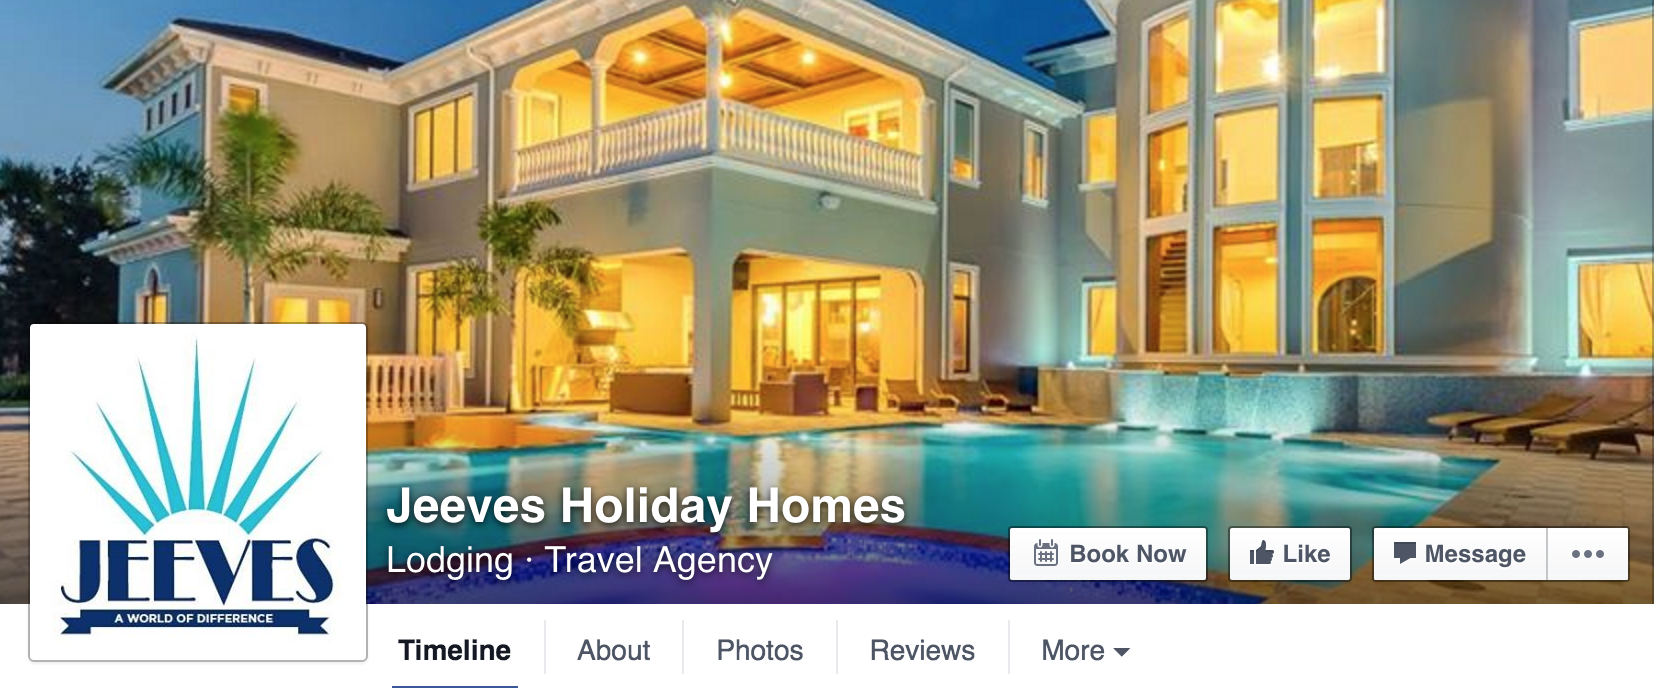 picture of the banner for the Jeeves Holiday Homes facebook page. Jeeves logo as profile picture and cover photo is of a large white mansion with lots of yellow light and a big blue pool in front.